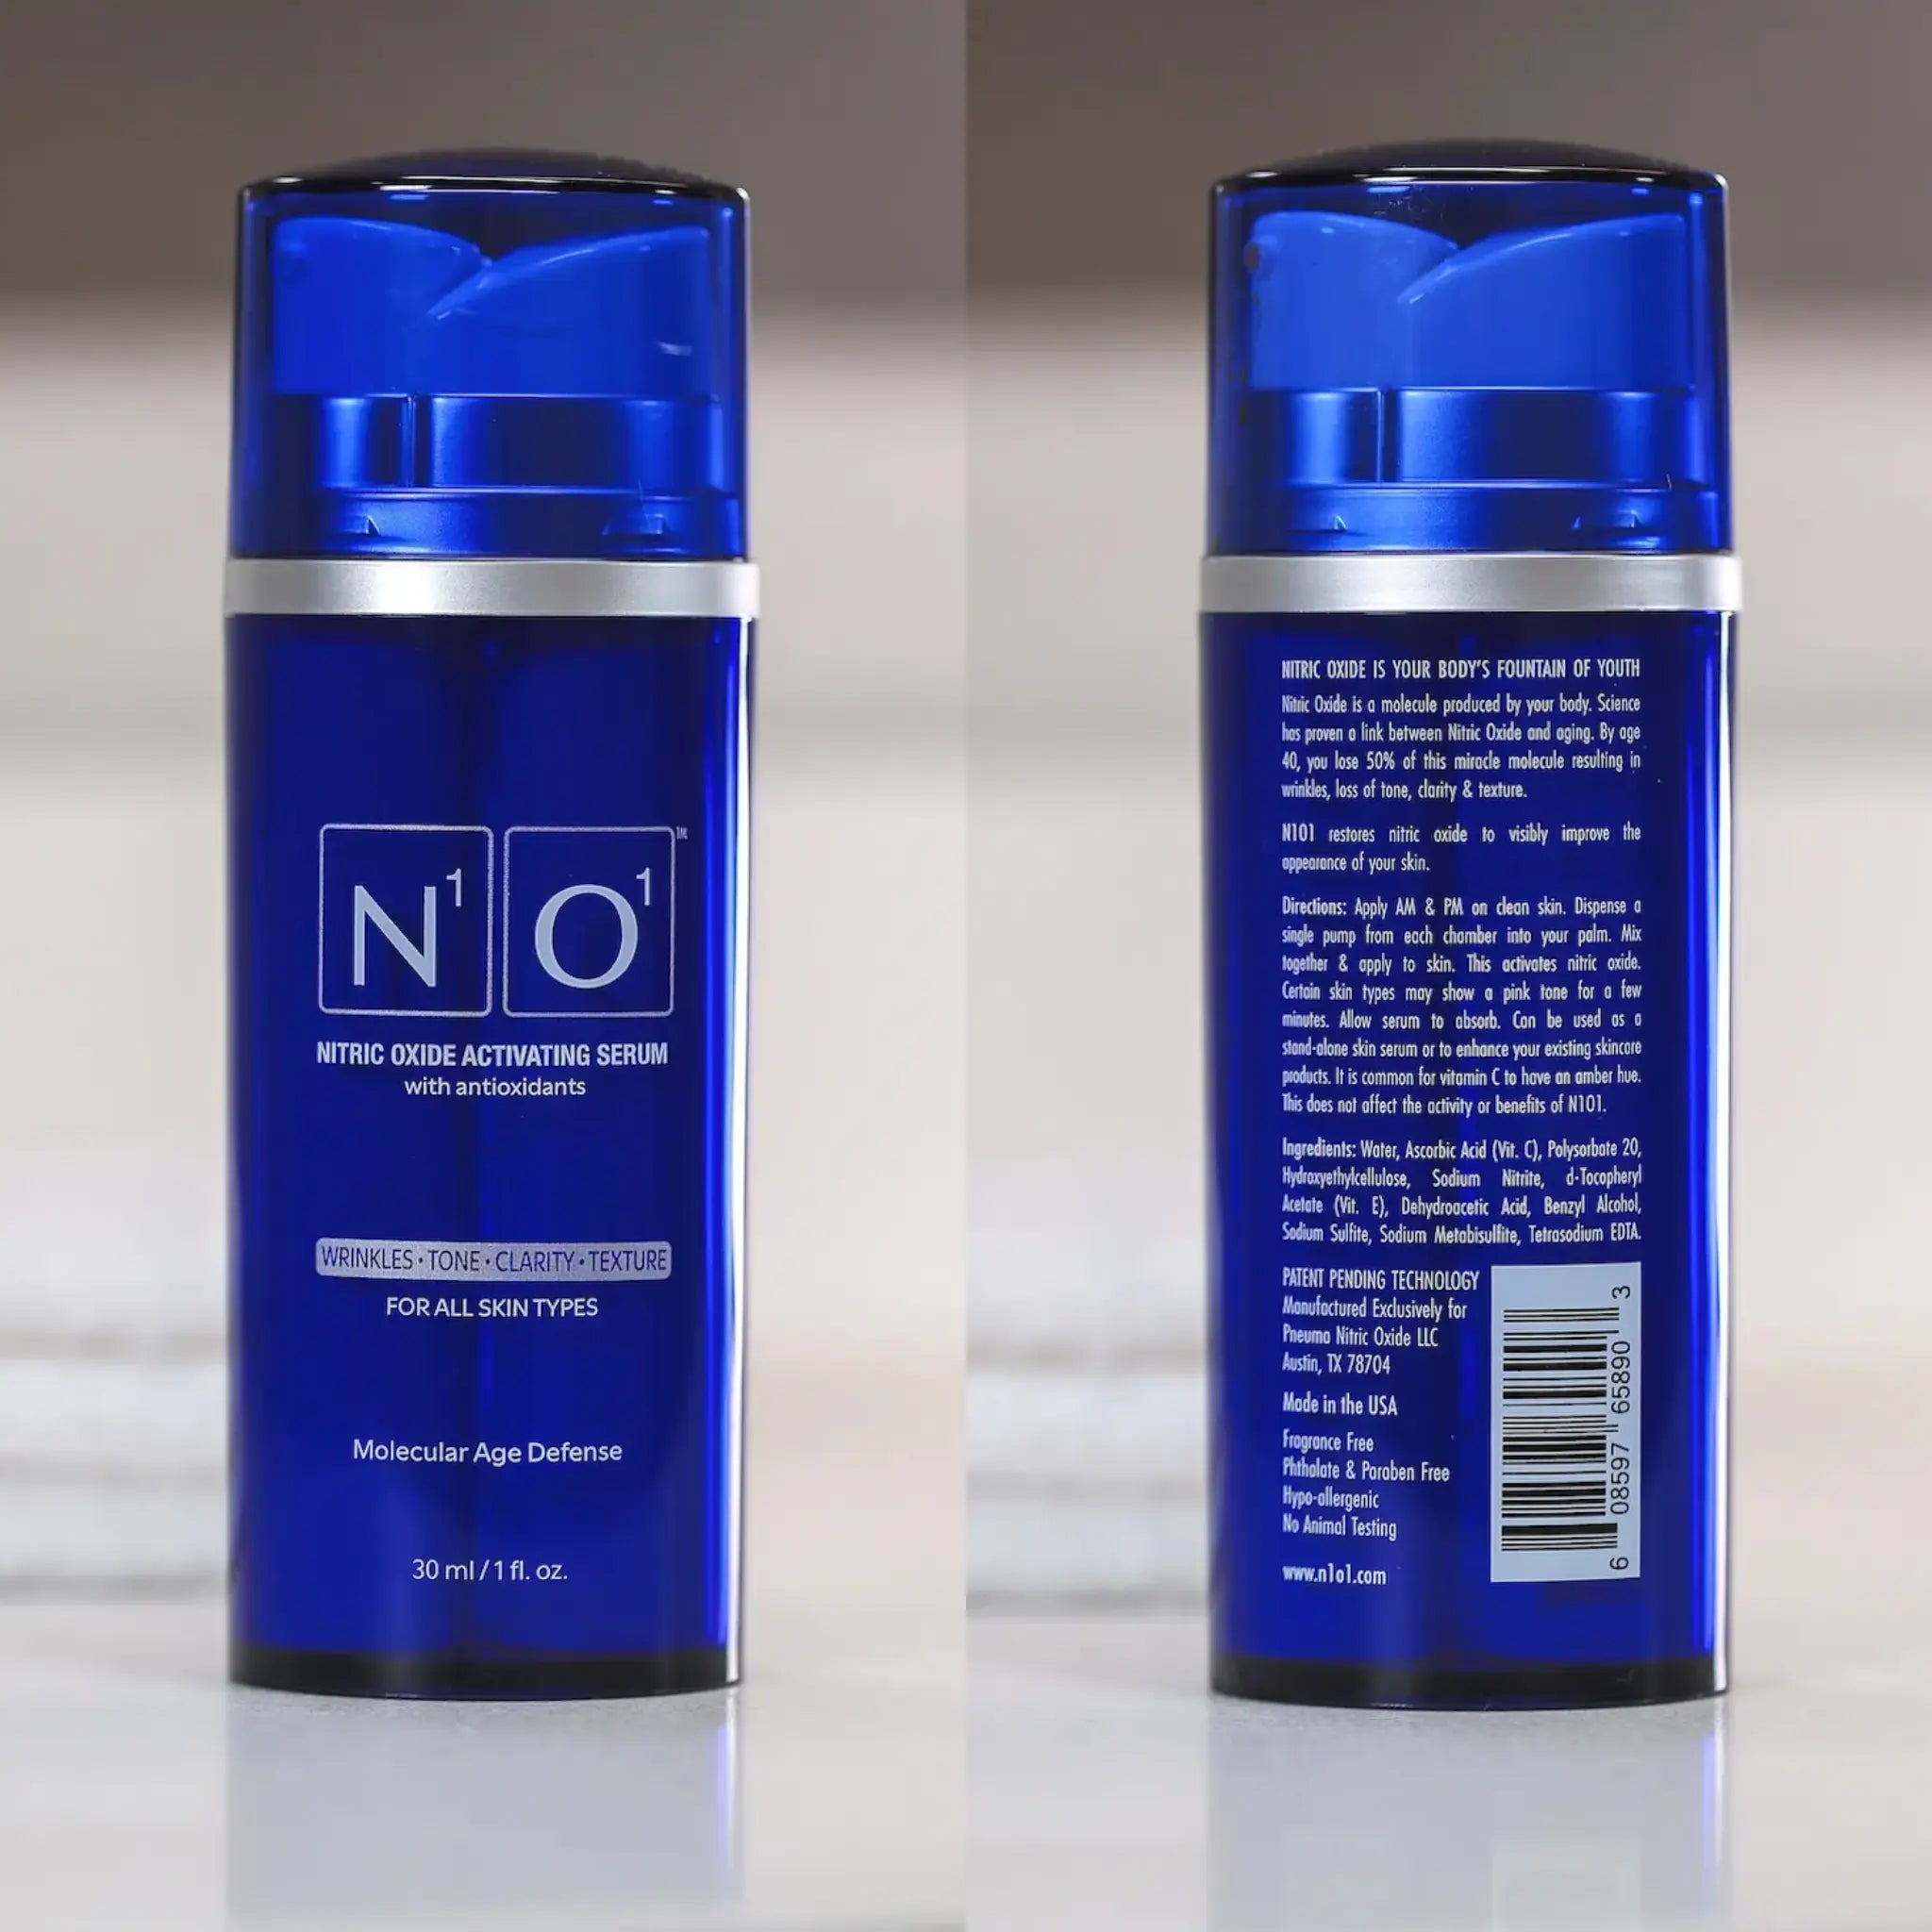 photo of the N1O1 nitric oxide activating skin serum 